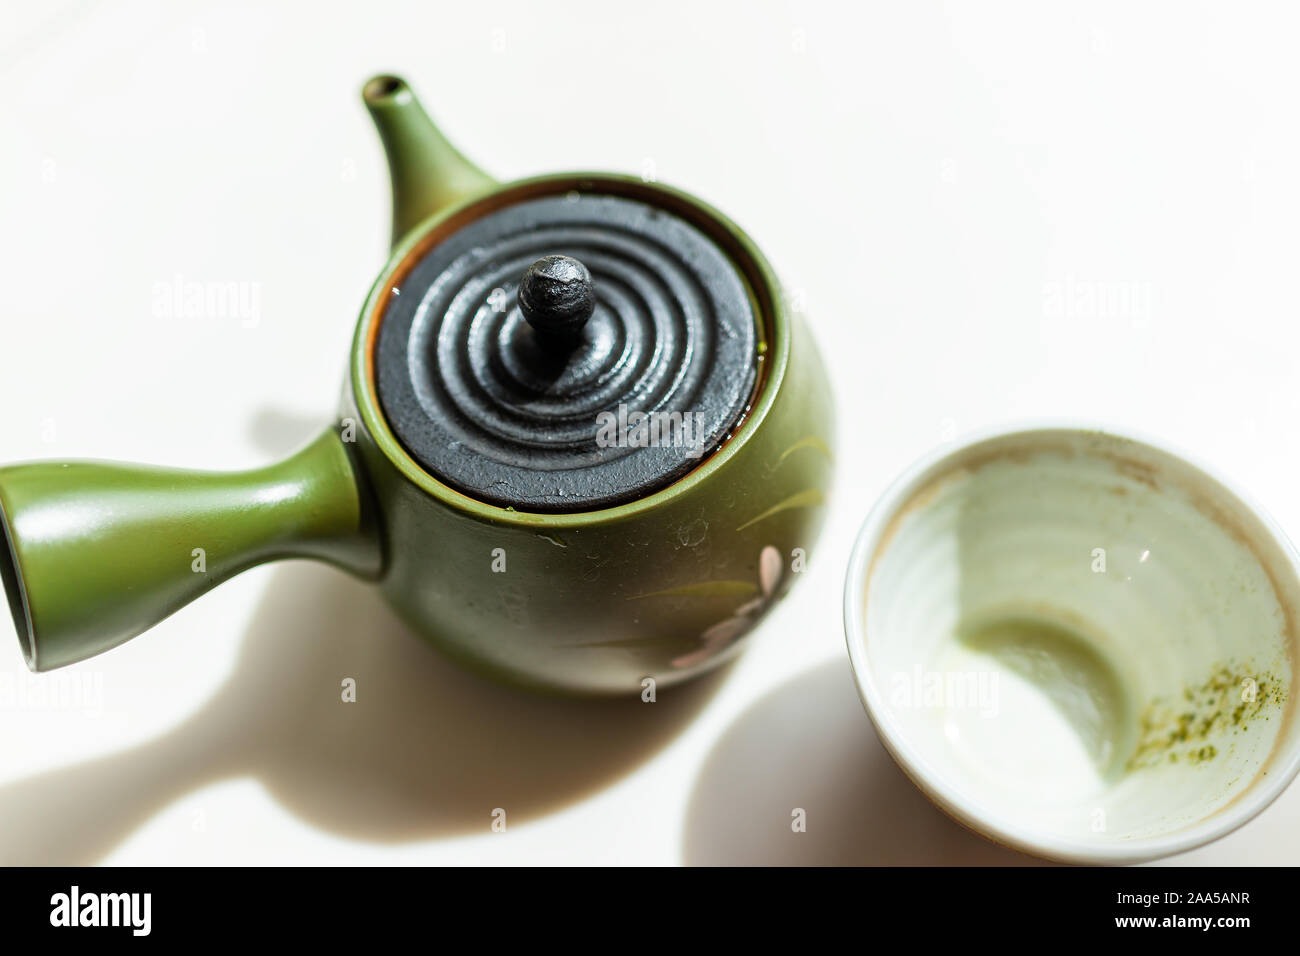 https://c8.alamy.com/comp/2AA5ANR/cast-iron-and-green-clay-teapot-on-table-closeup-with-empty-used-cup-of-japanese-drink-with-kyusu-handle-brewing-during-ceremony-2AA5ANR.jpg